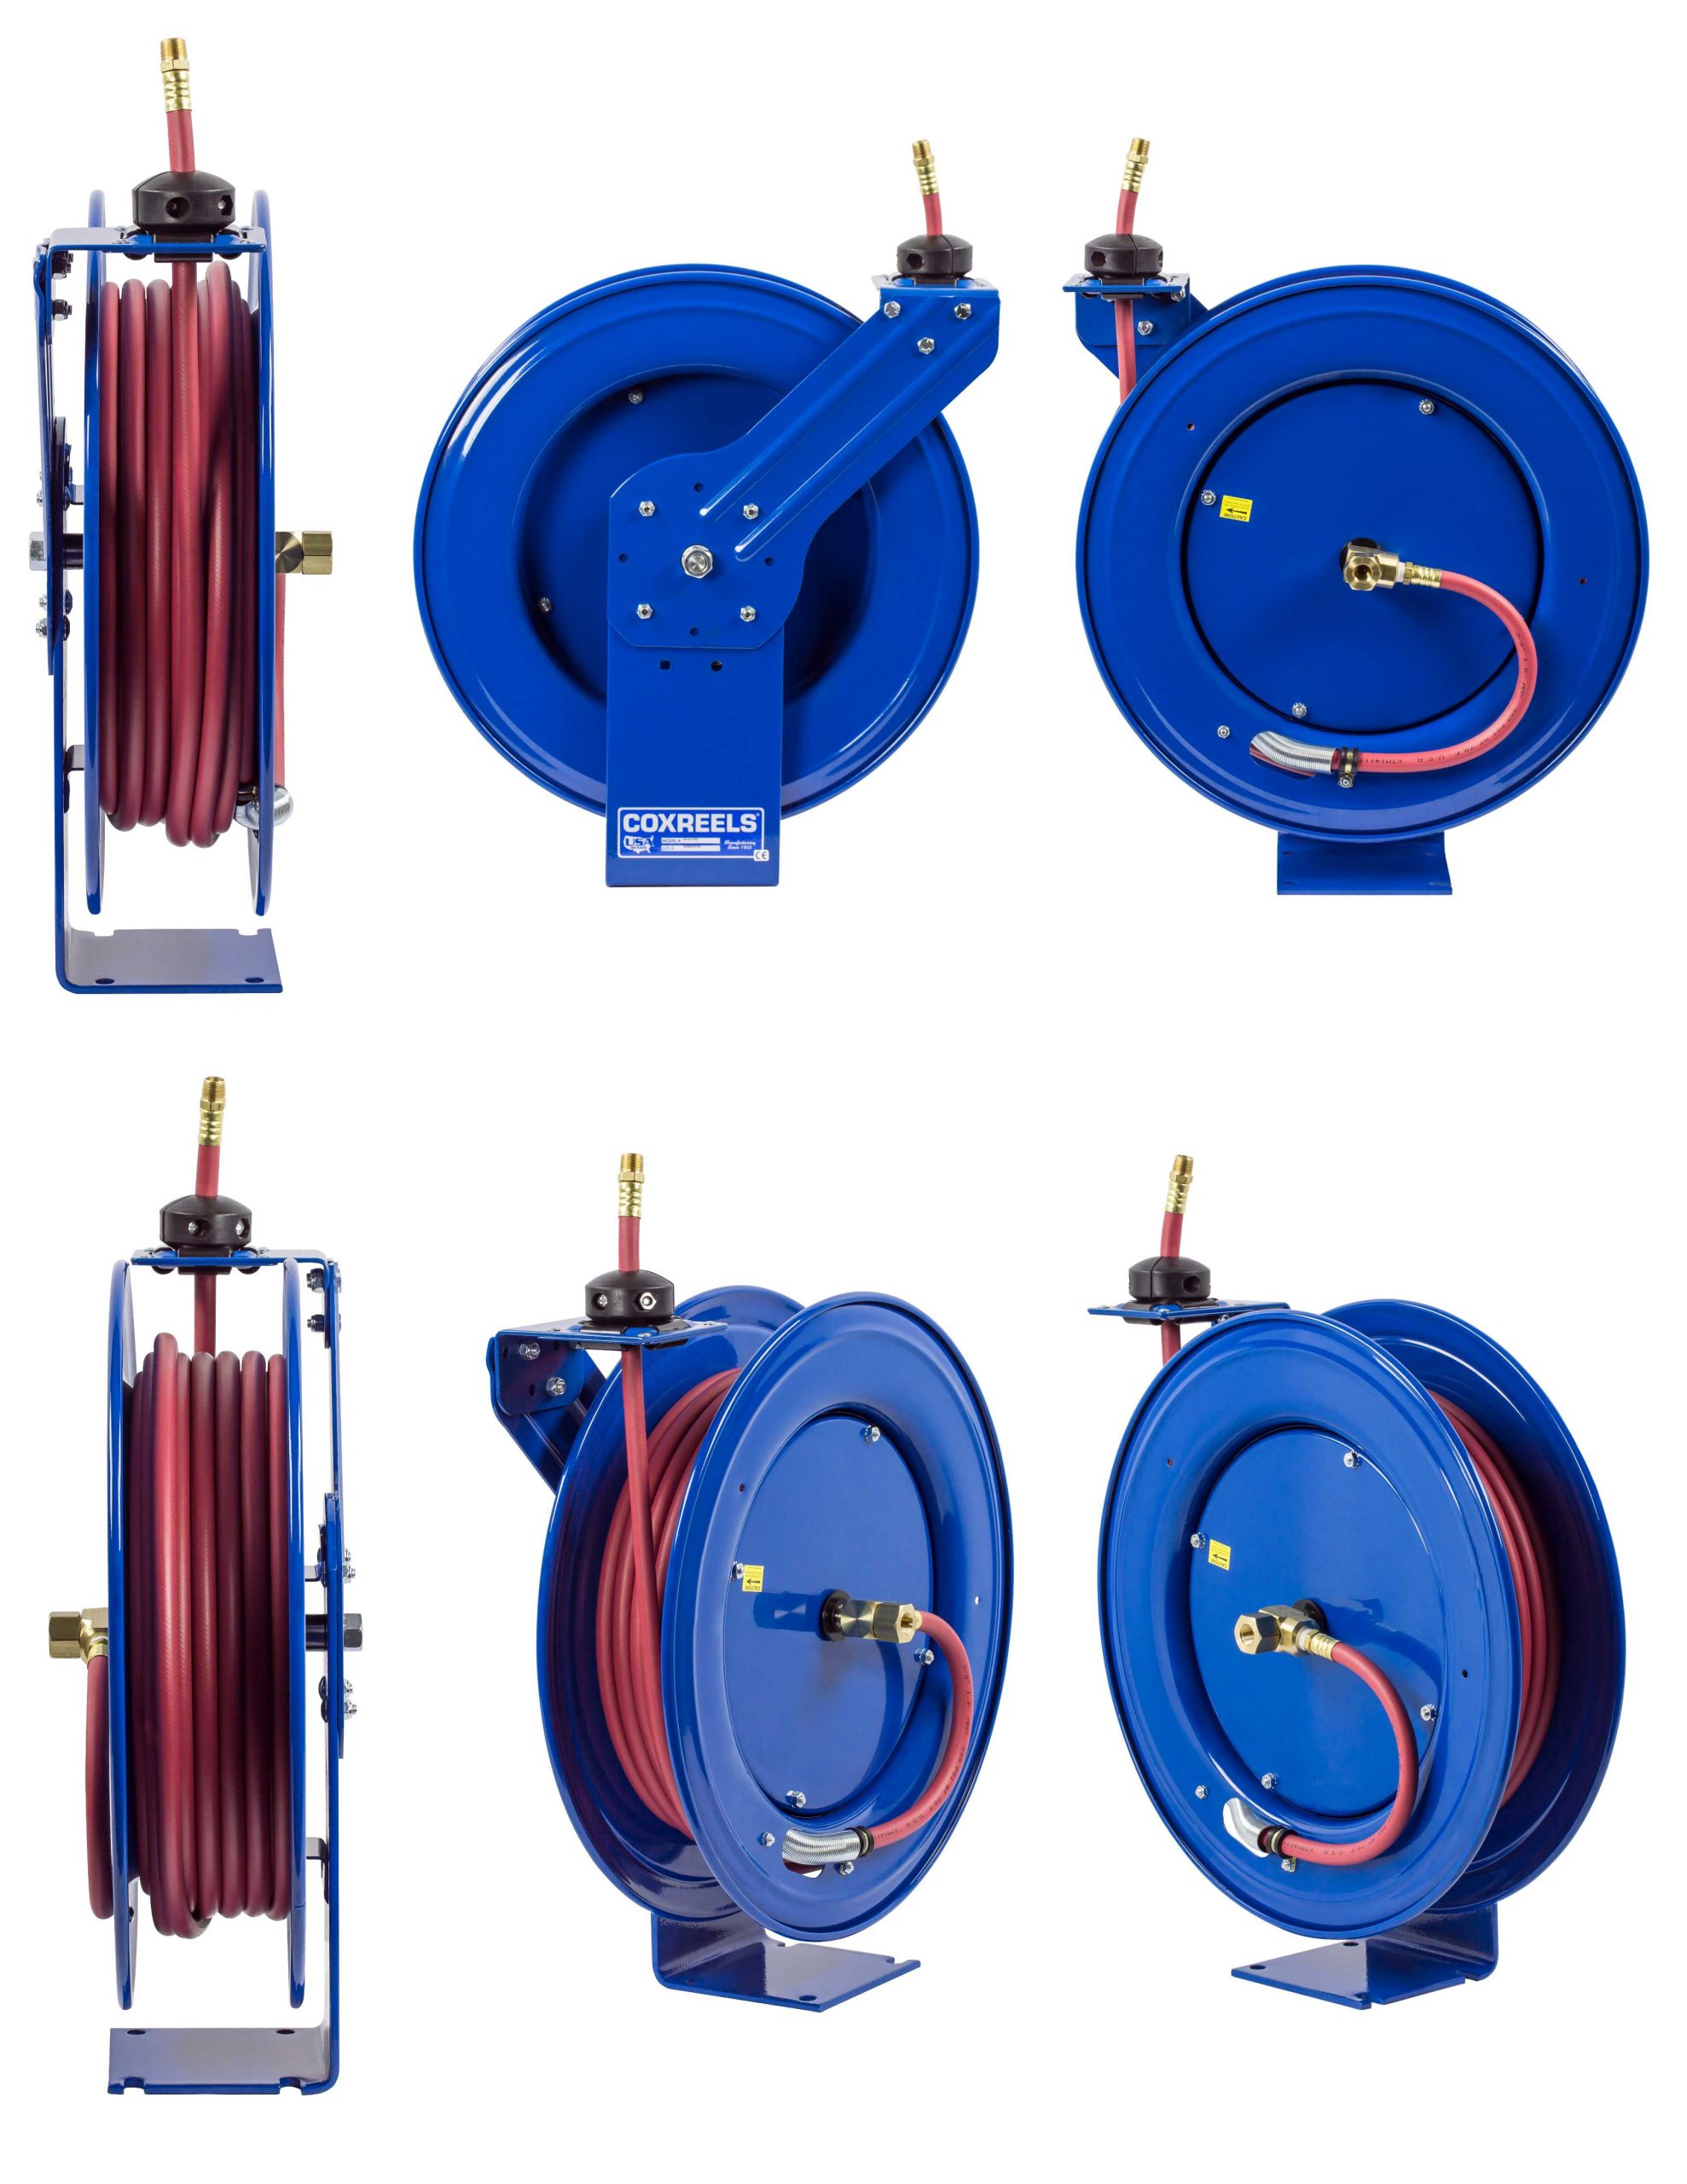 Spring Driven Hose Reels - Super Hub - Cut and Couple